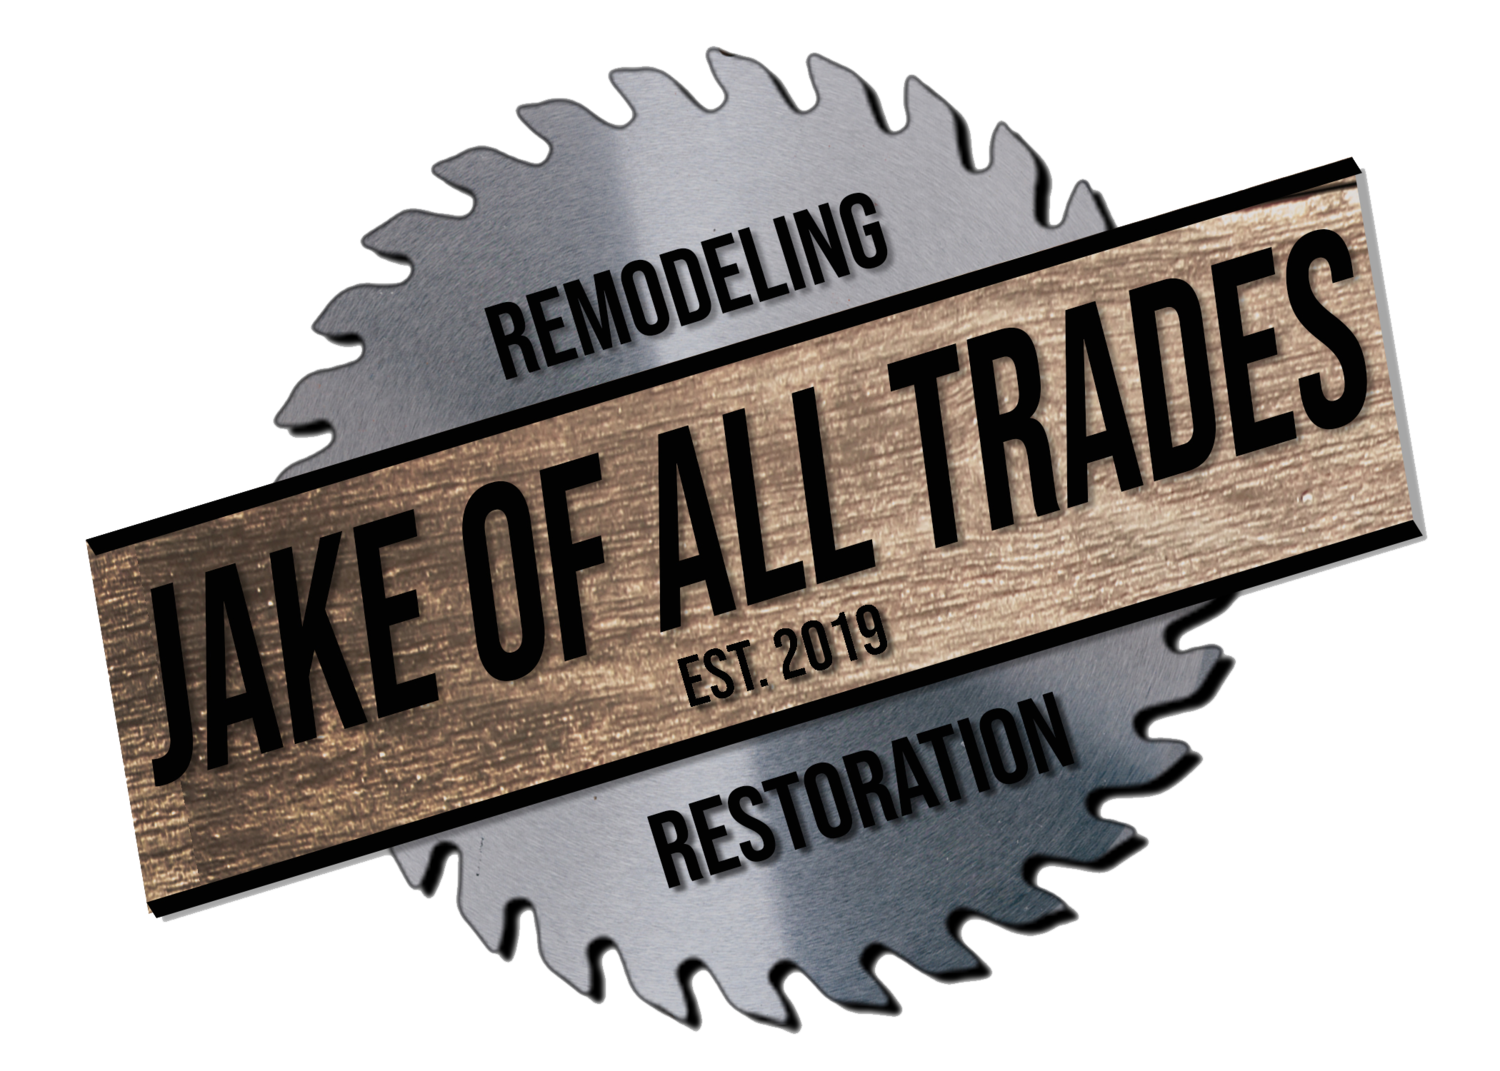 Jake of All Trades, Inc.